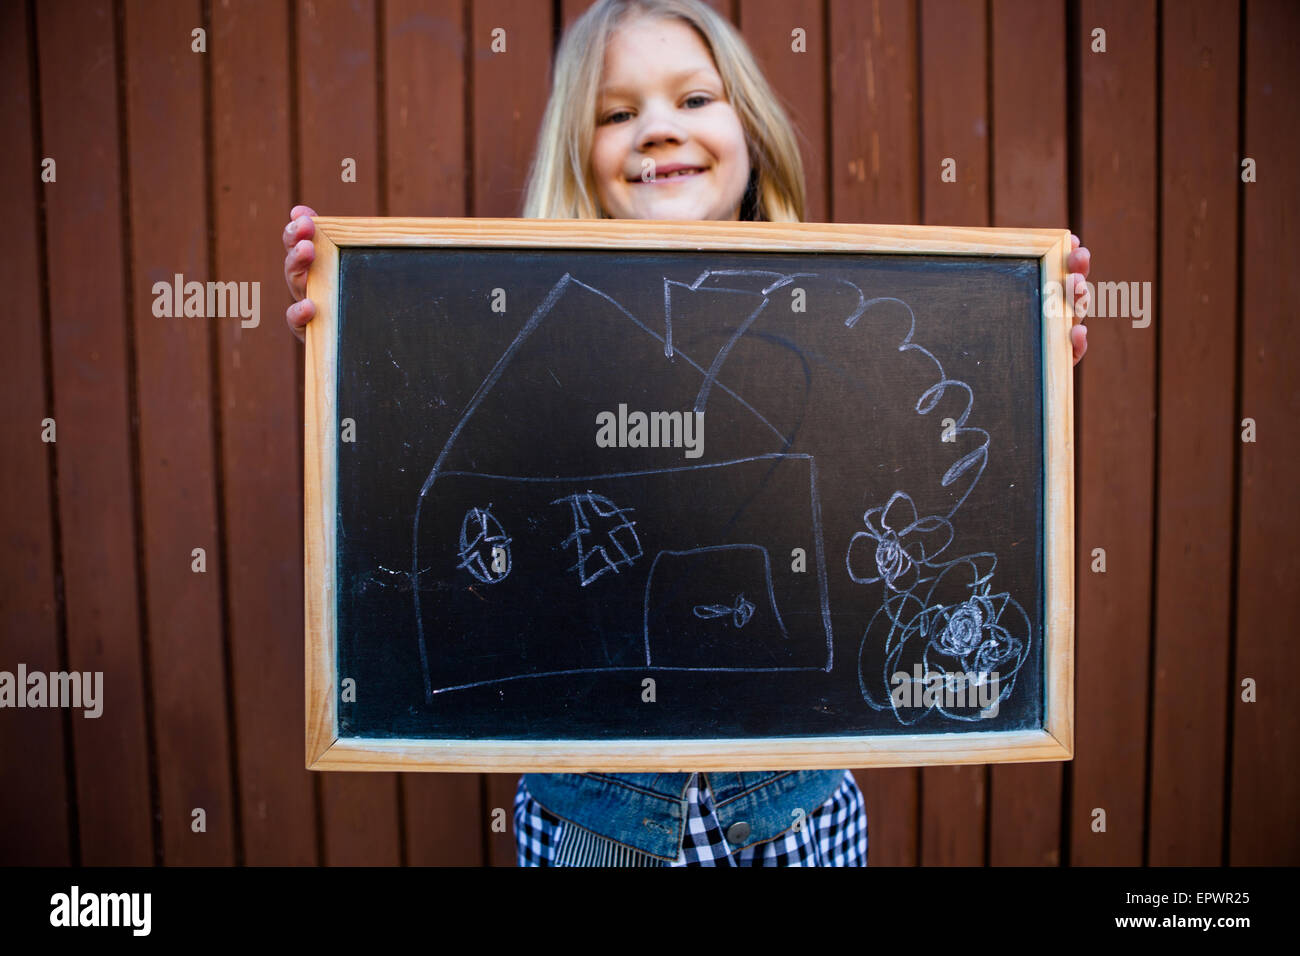 Girl holding a chalkboard with a picture of a house on it Stock Photo